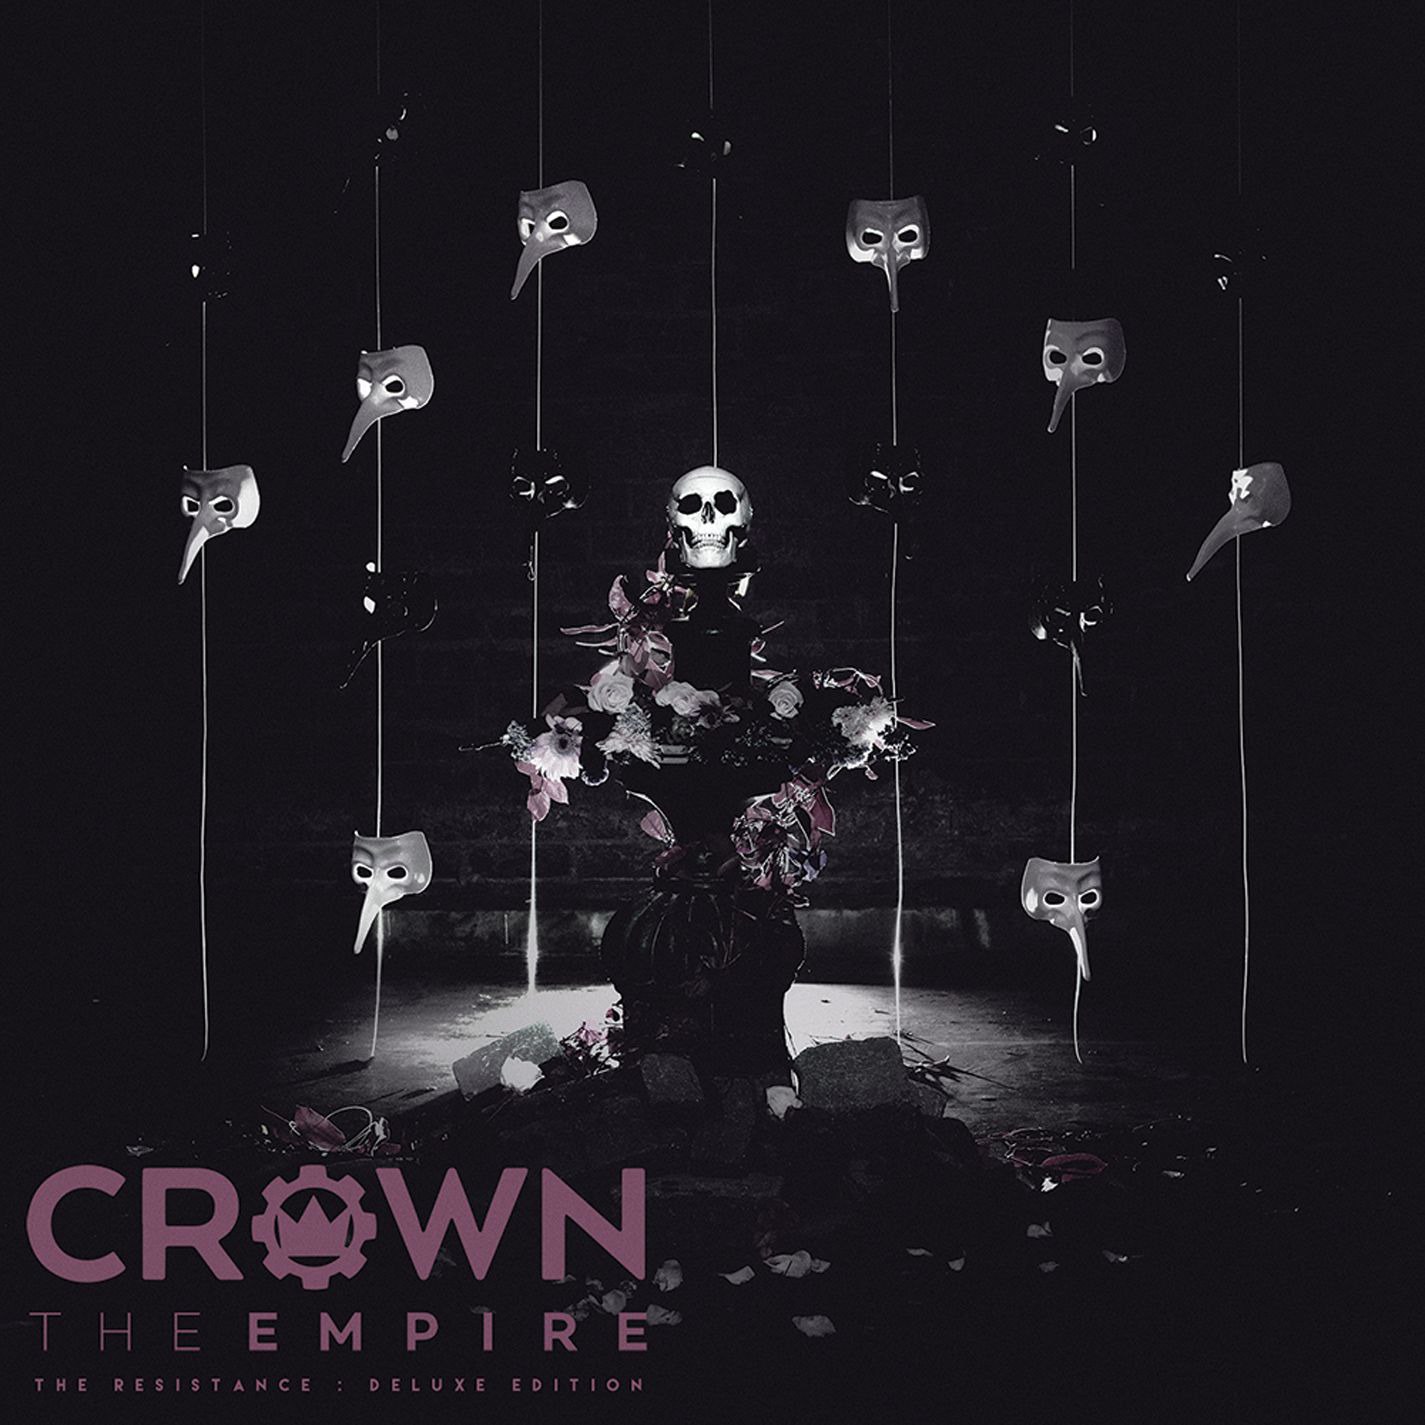 Crown The Empire - The Resistance [Deluxe Edition] (2015) Album Info